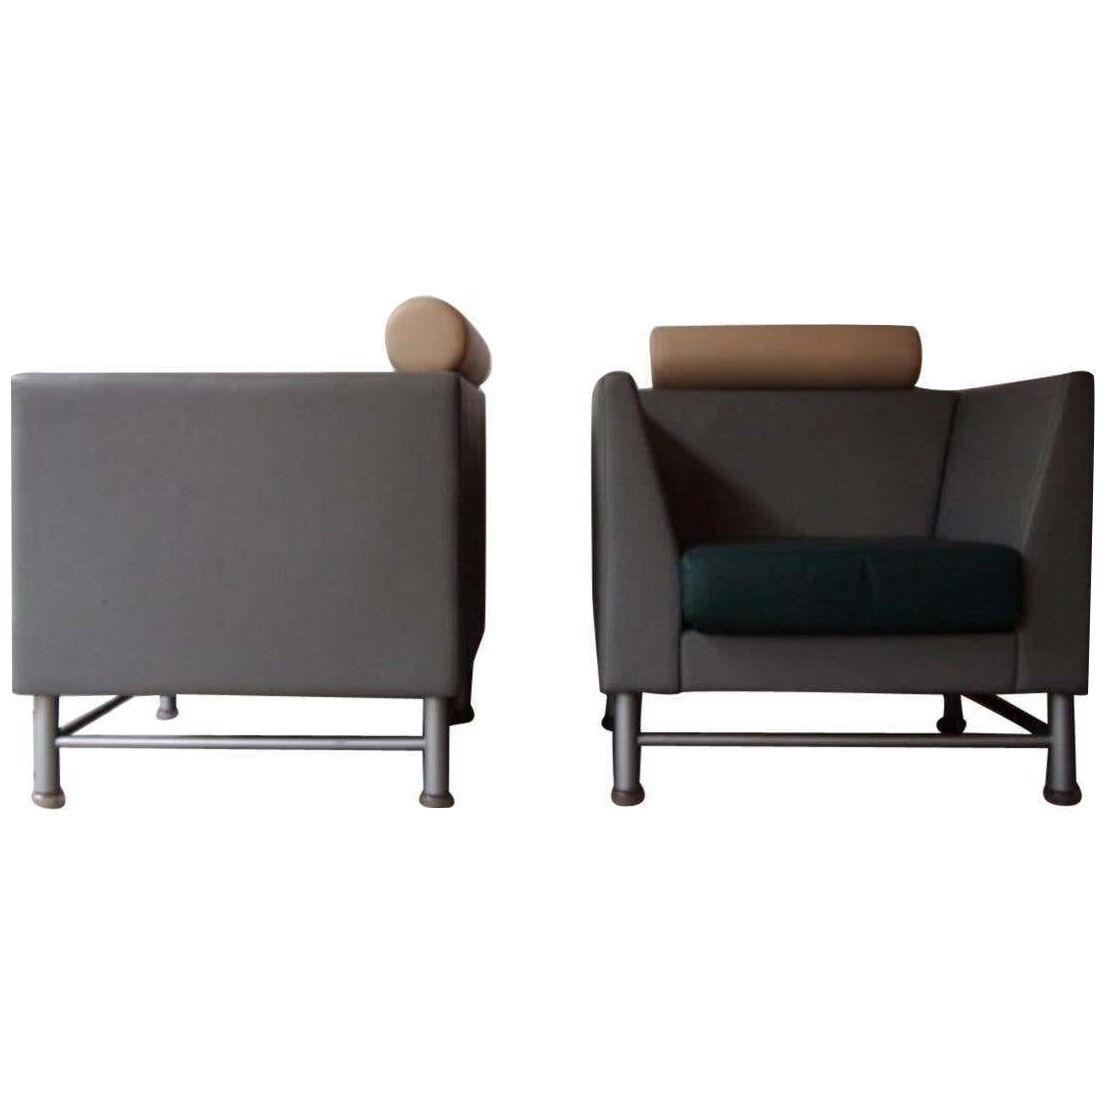 Pair of 1980s "East Side" Club Lounge Chair by Ettore Sottsass for Knoll 